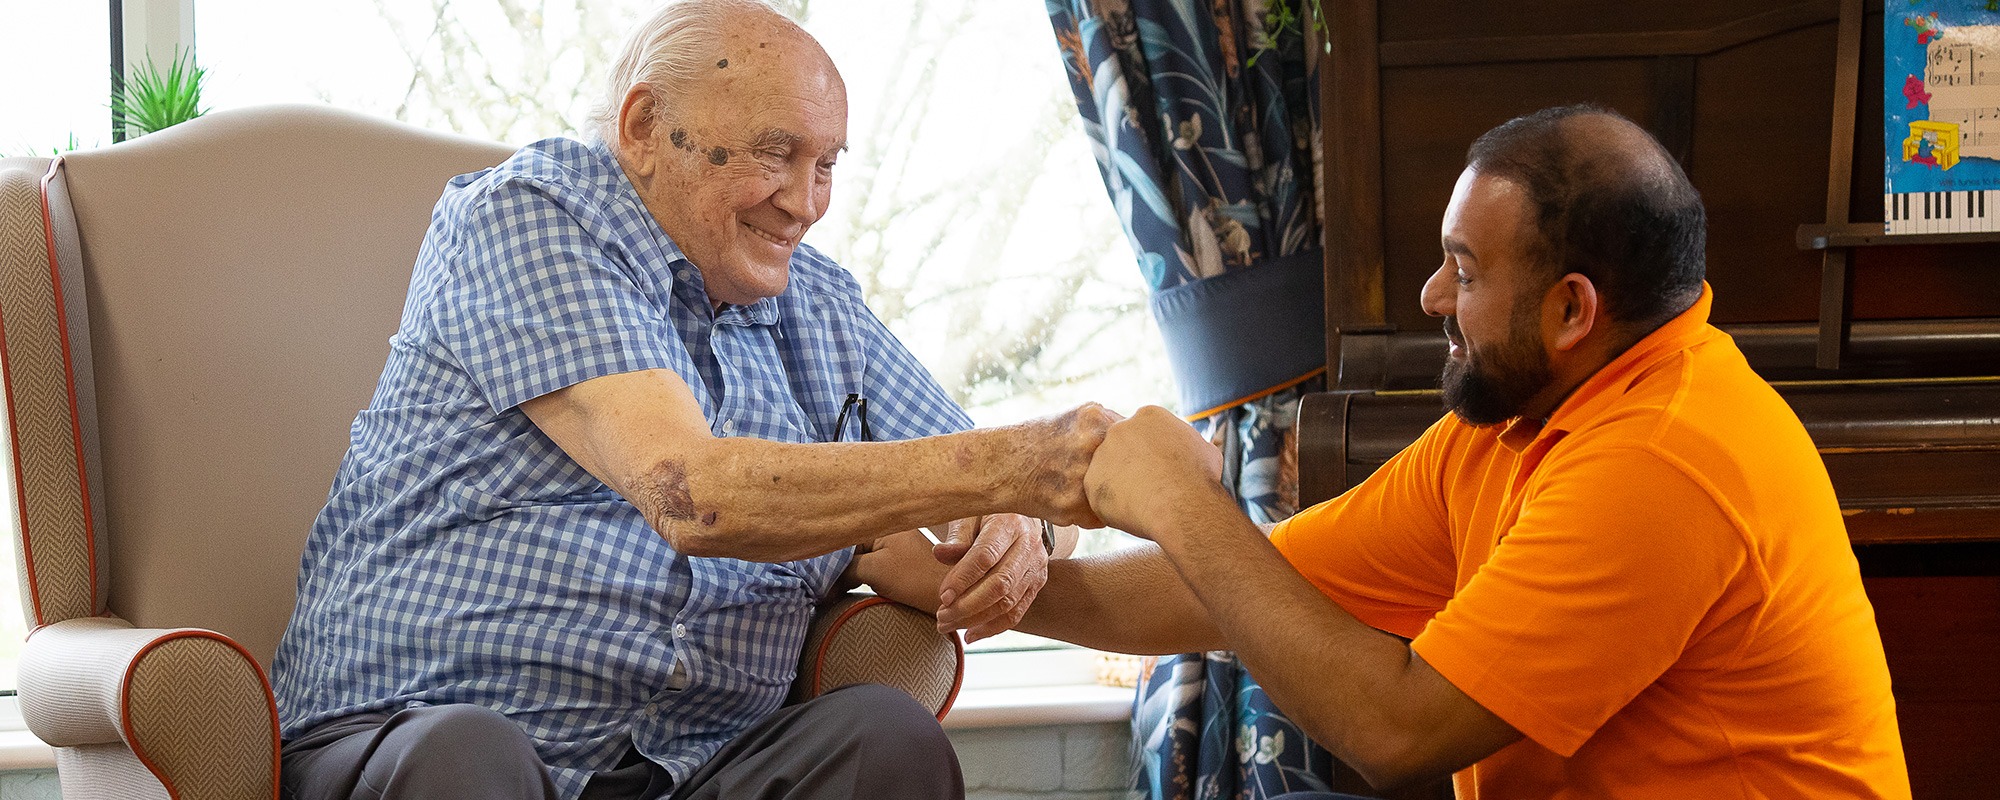 Care worker fist bumps with resident help and advice